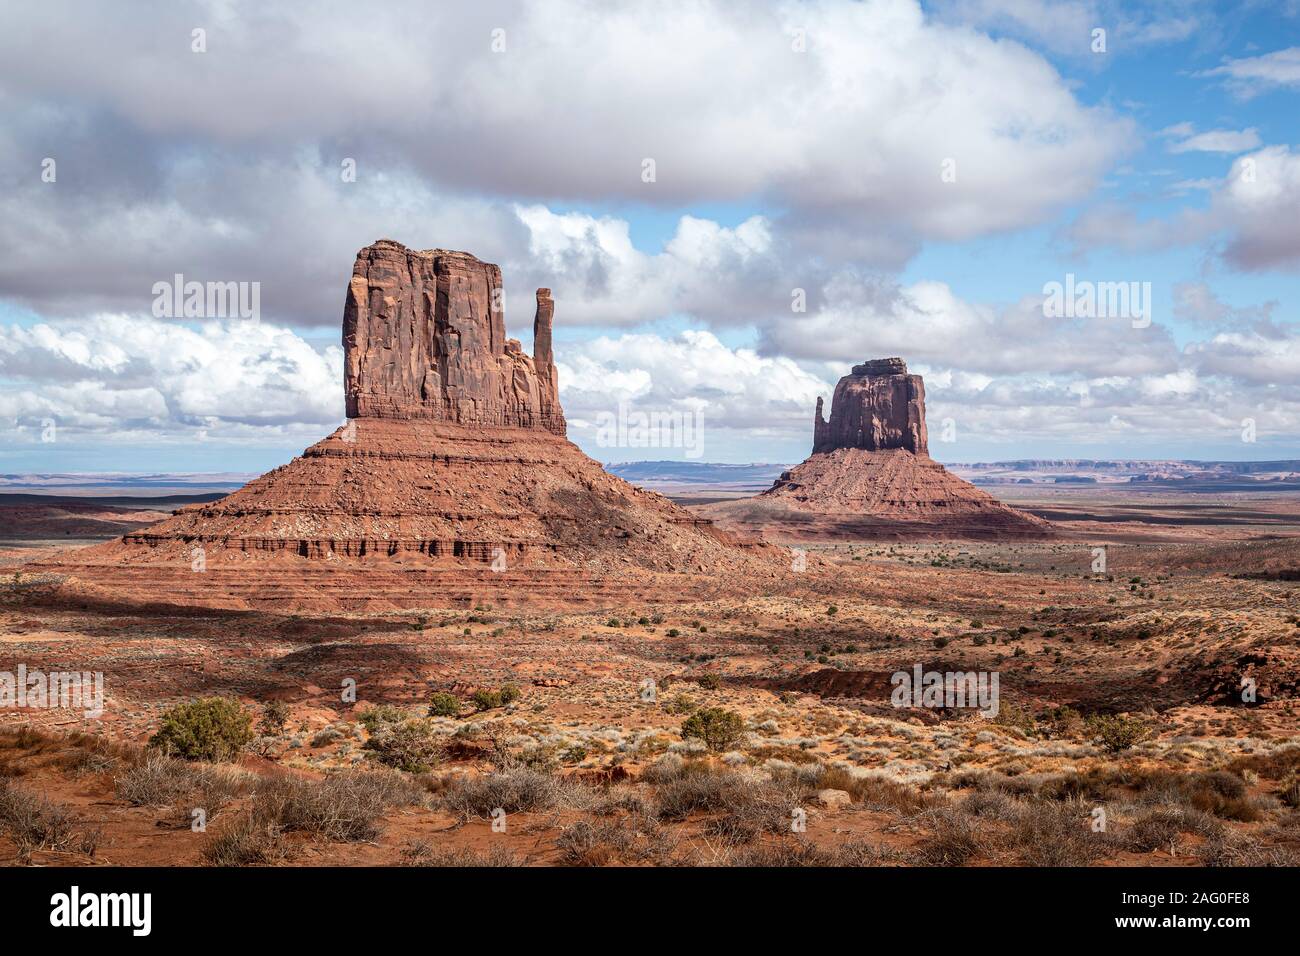 West Mitten Butte (left) and East Mitten Butte (The Mittens), Monument Valley, Utah and Arizona border, USA Stock Photo